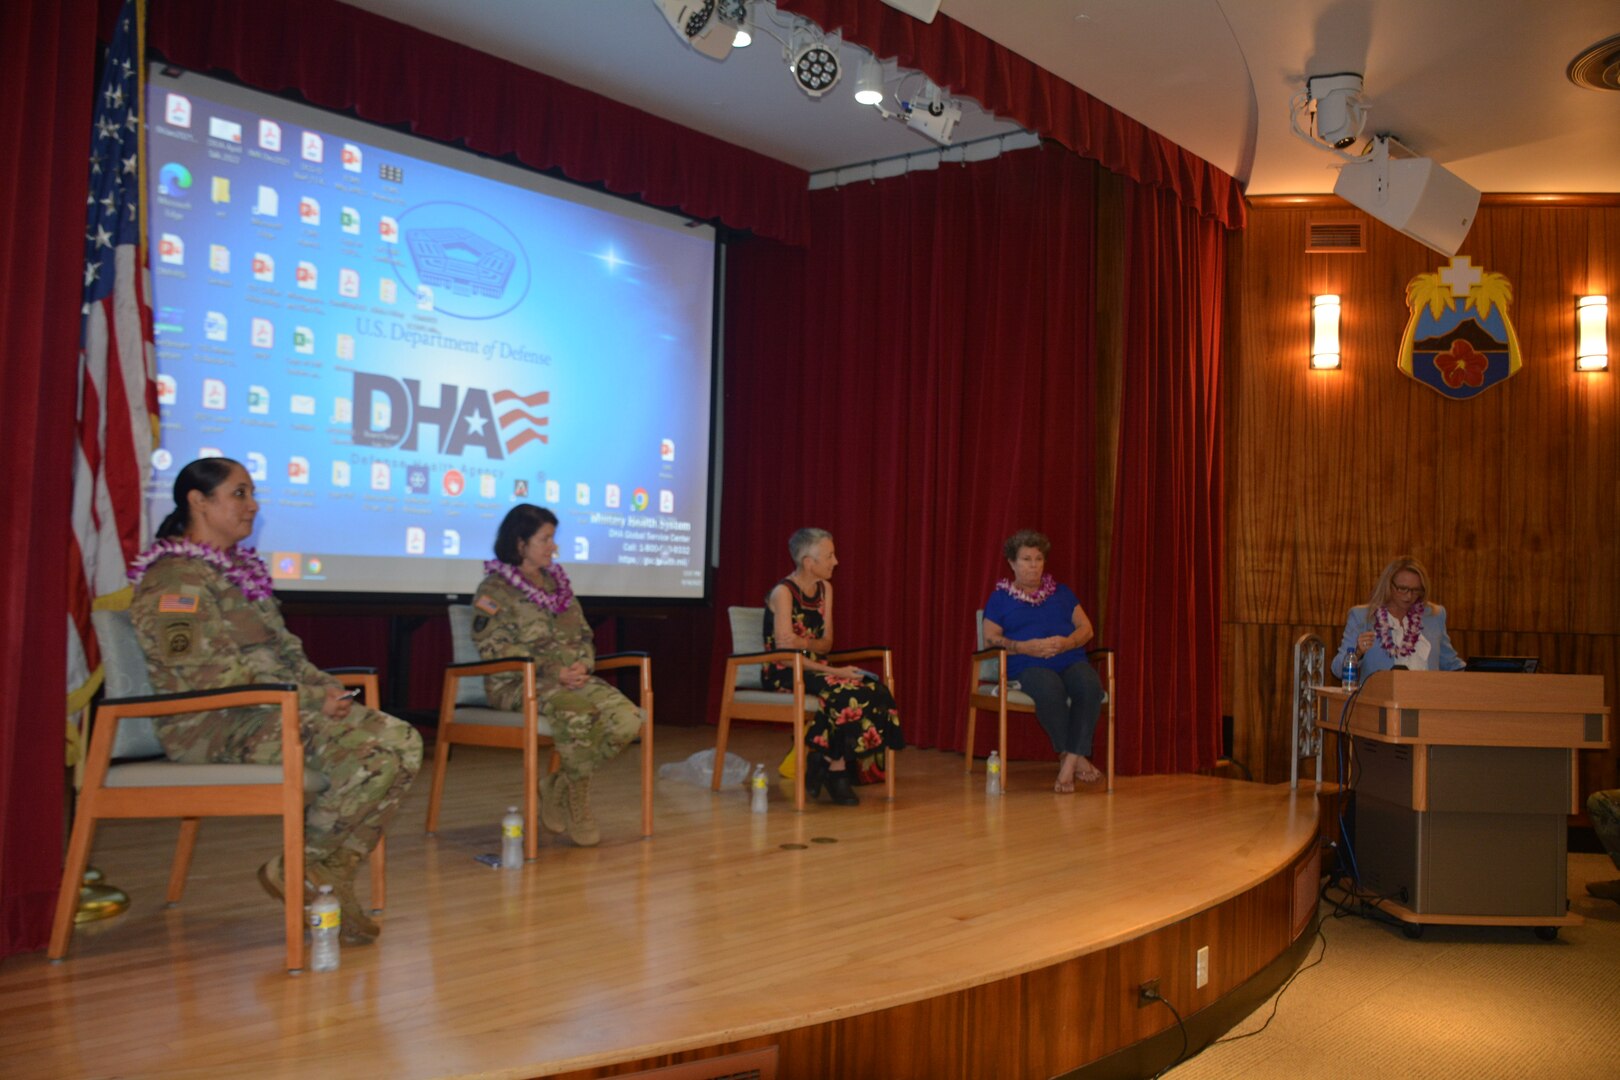 D.E.I.A. Committee presents Women in the workplace panel discussion